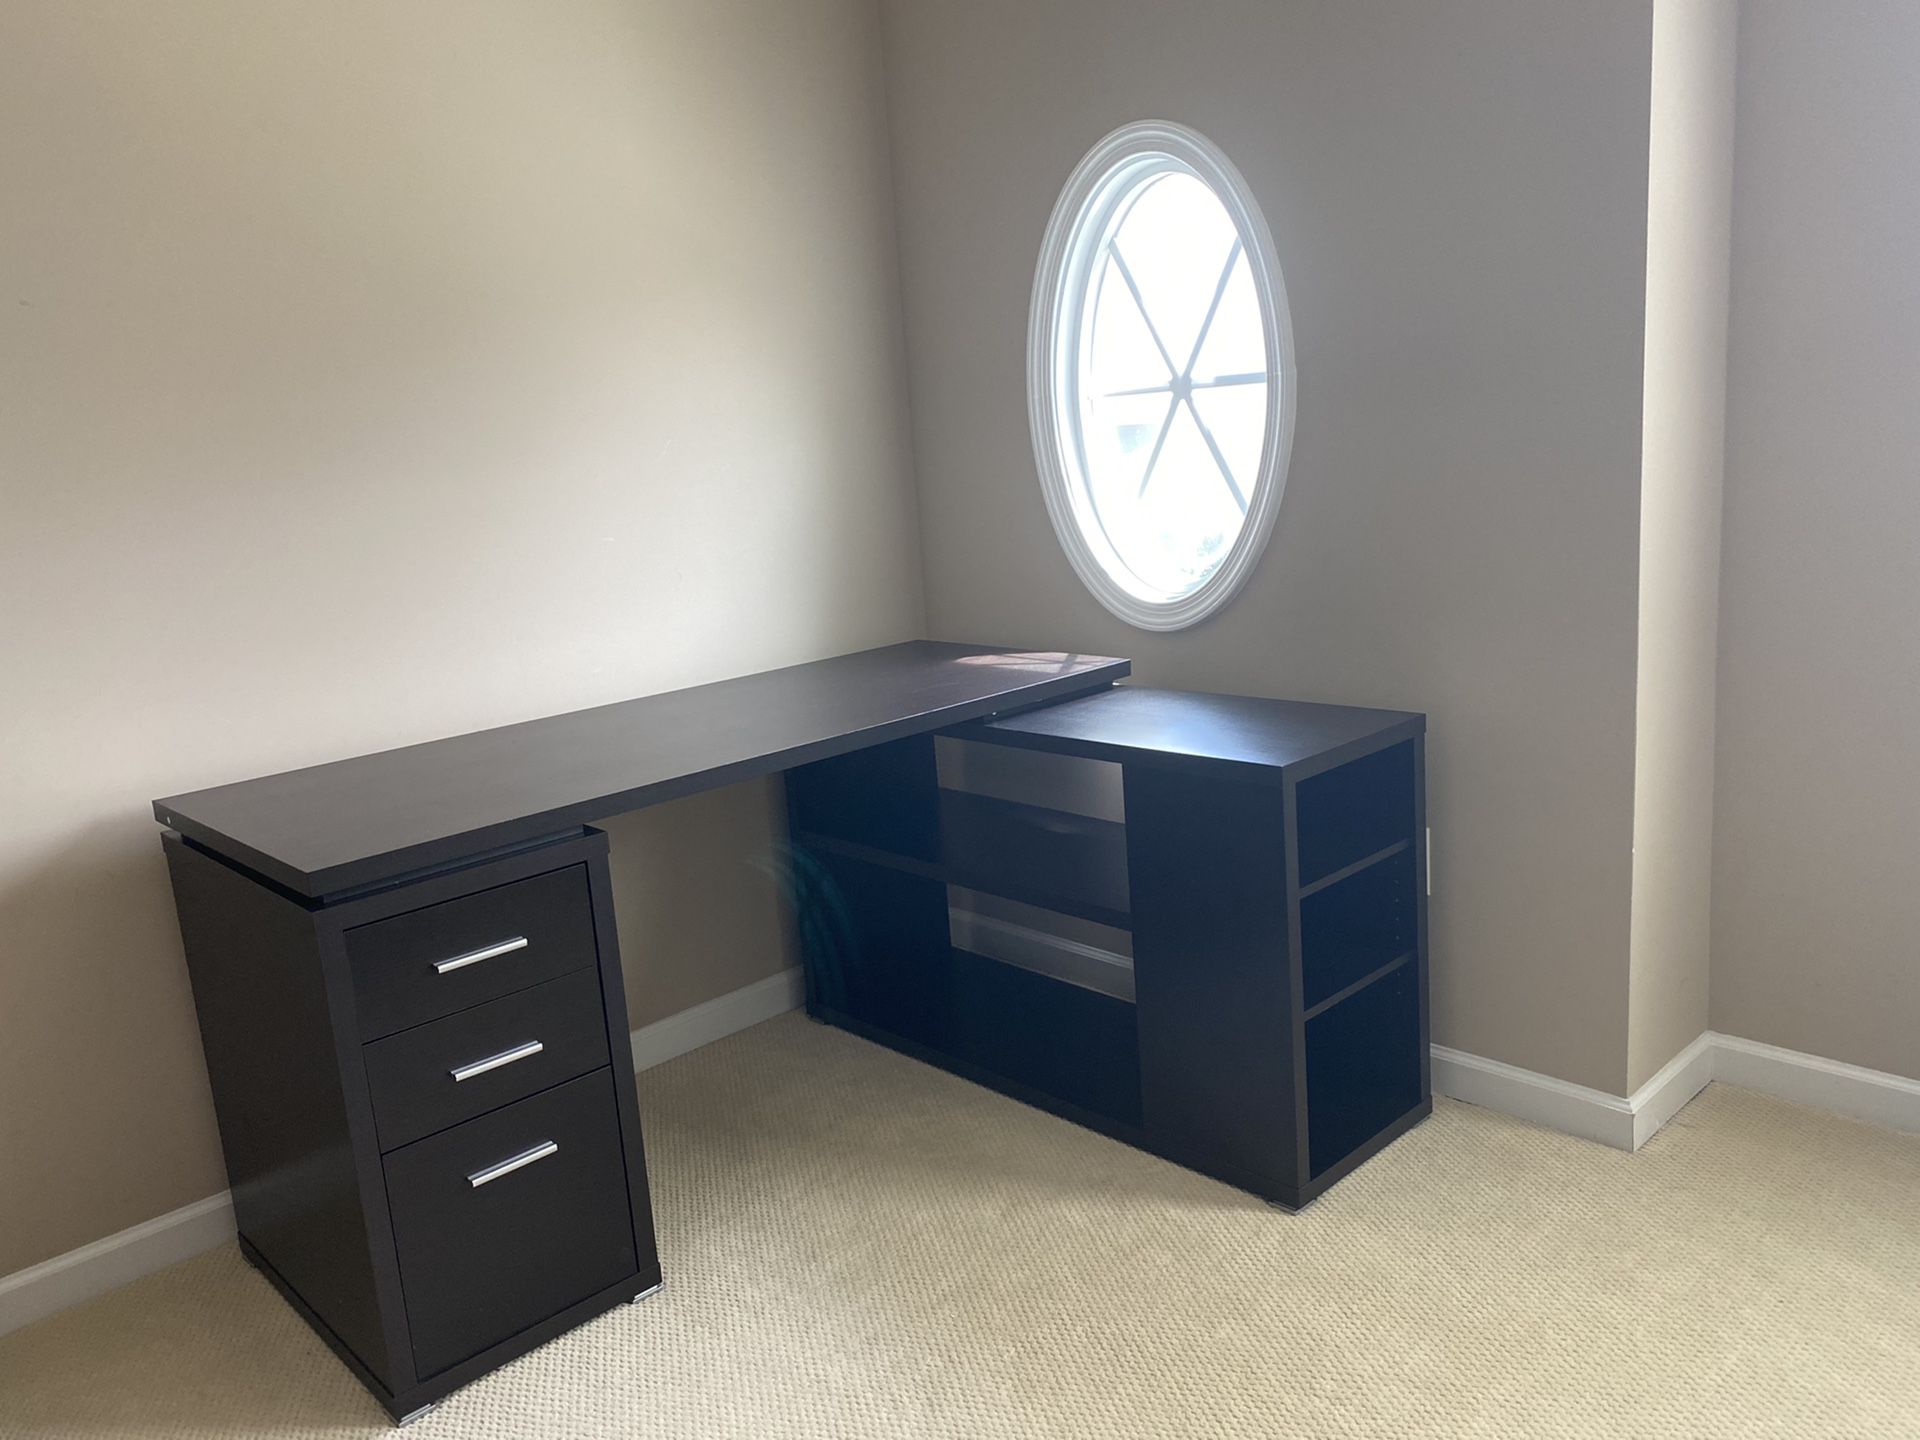 Brand new study/office table for sale